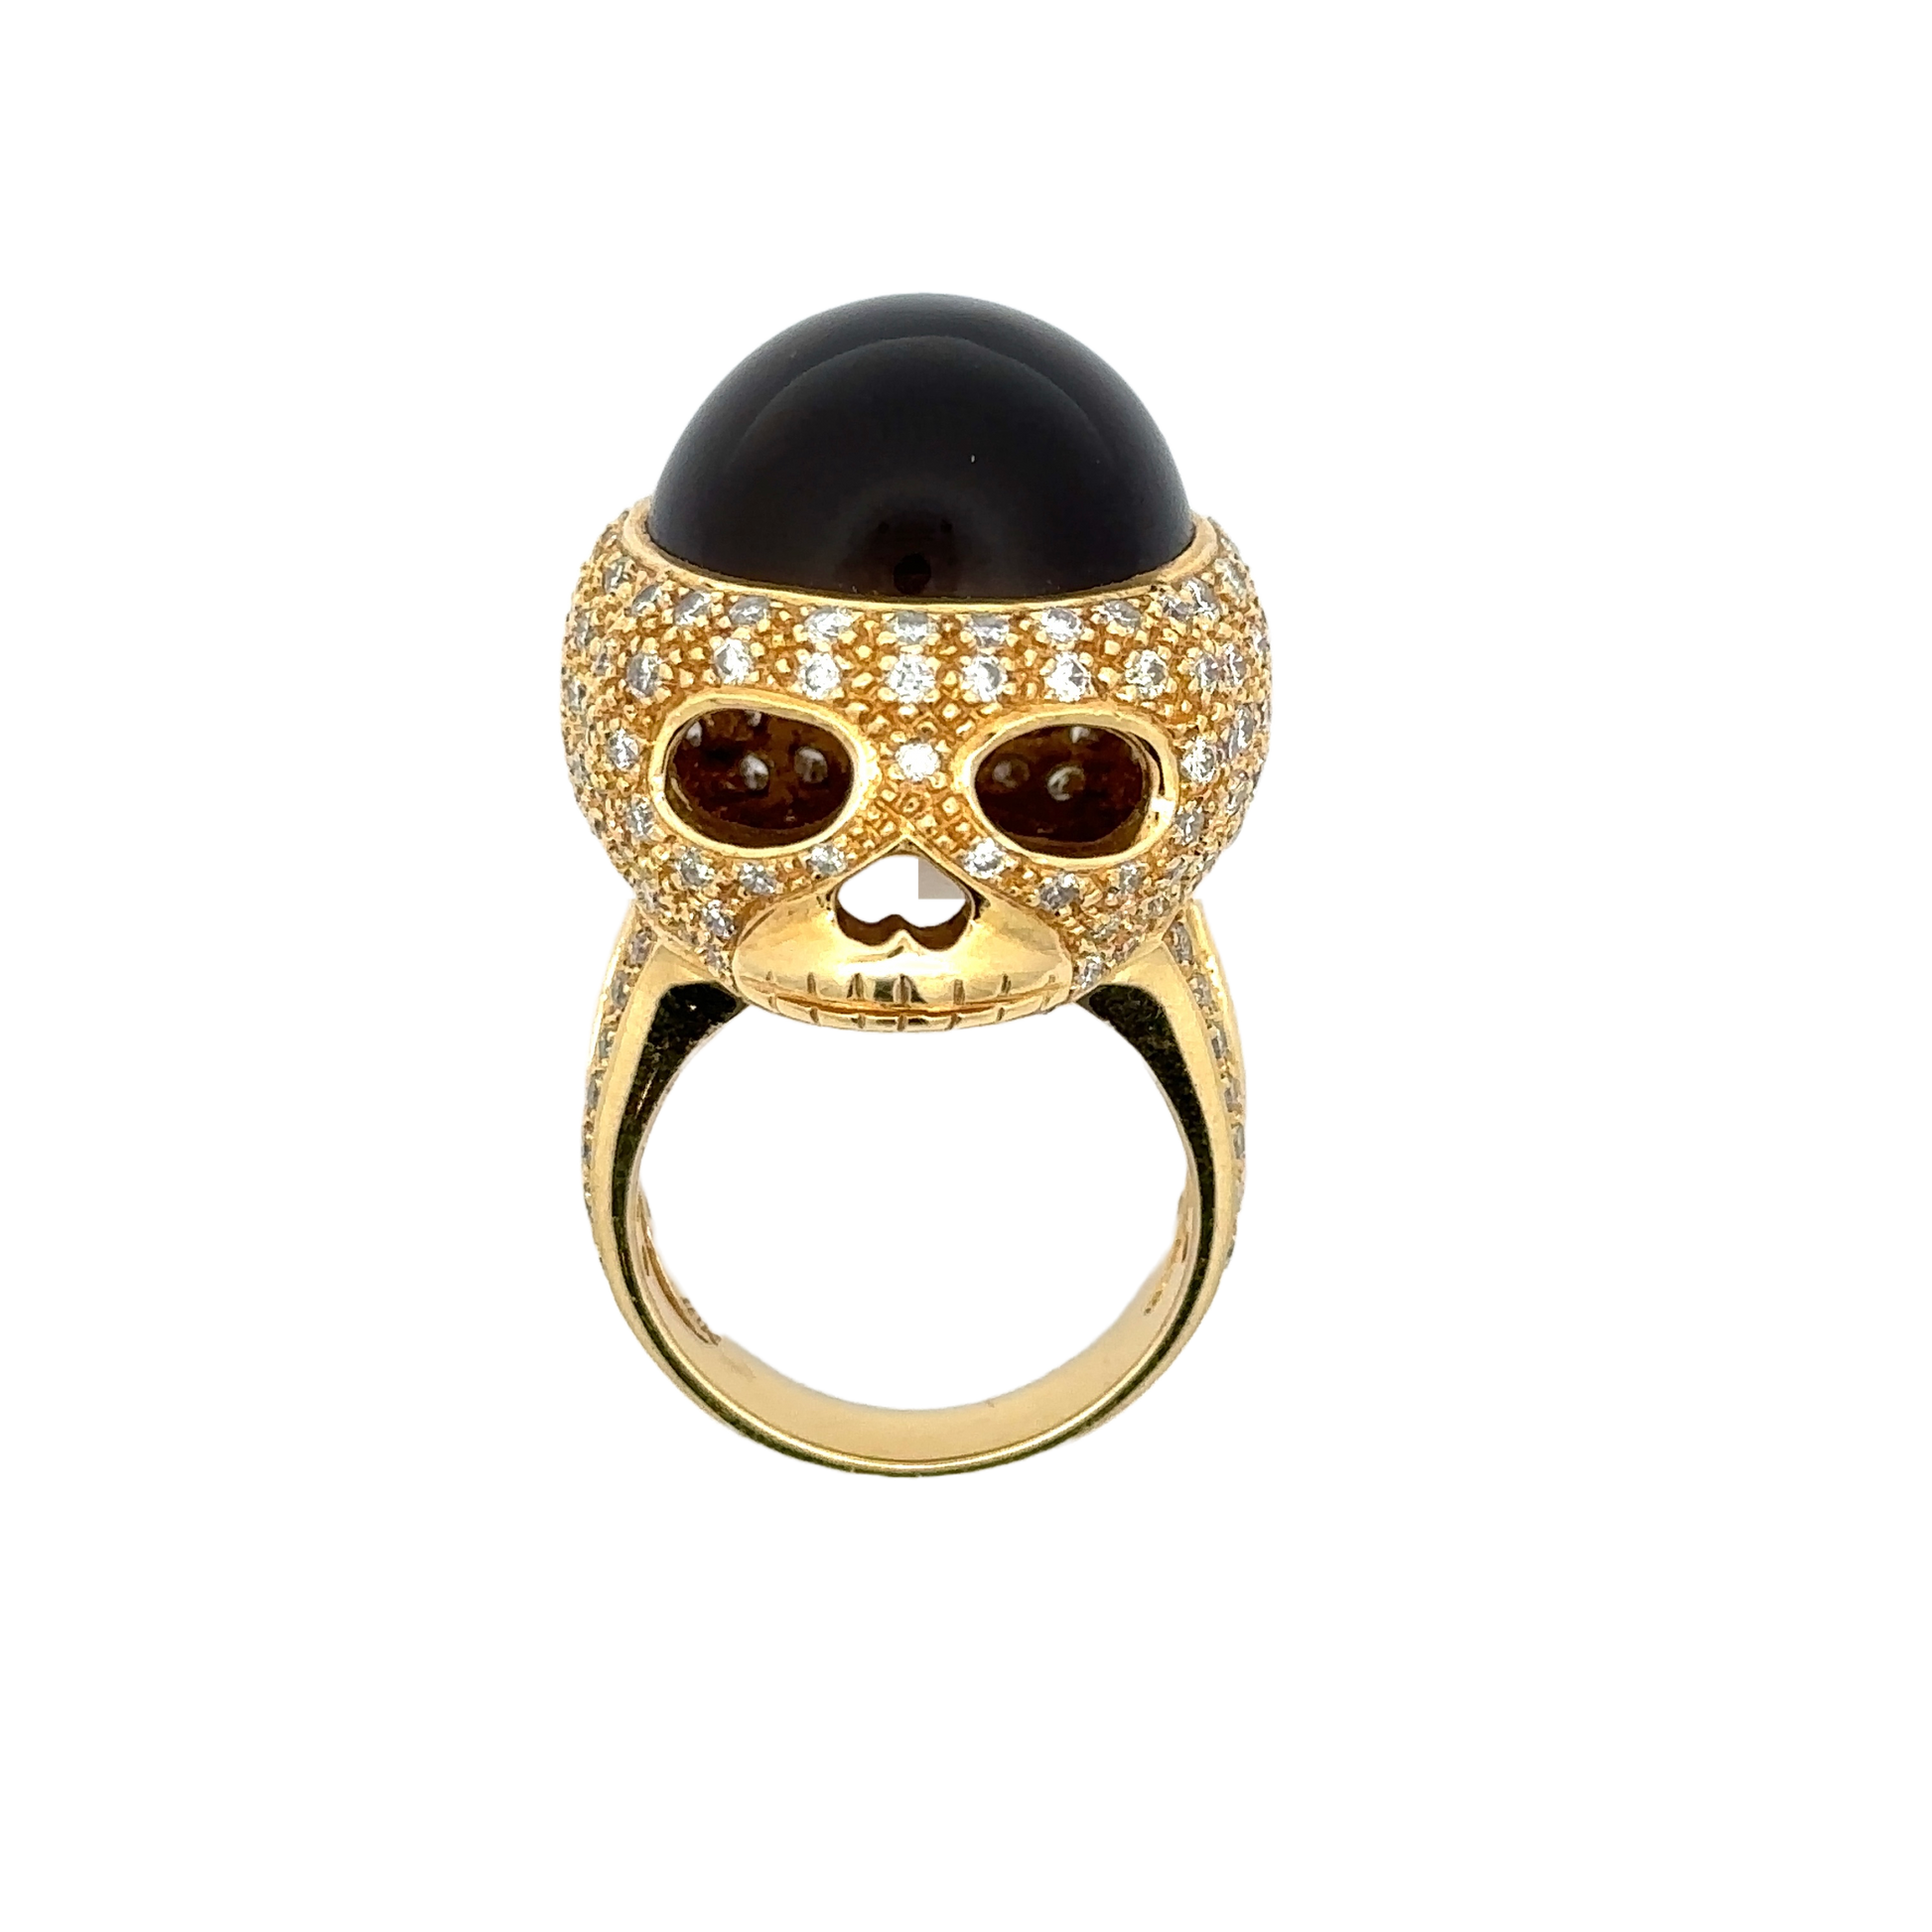 18K yellow gold cat's eye diamond skull ring. Shows the skull face of the ring. Some scratches on the band.